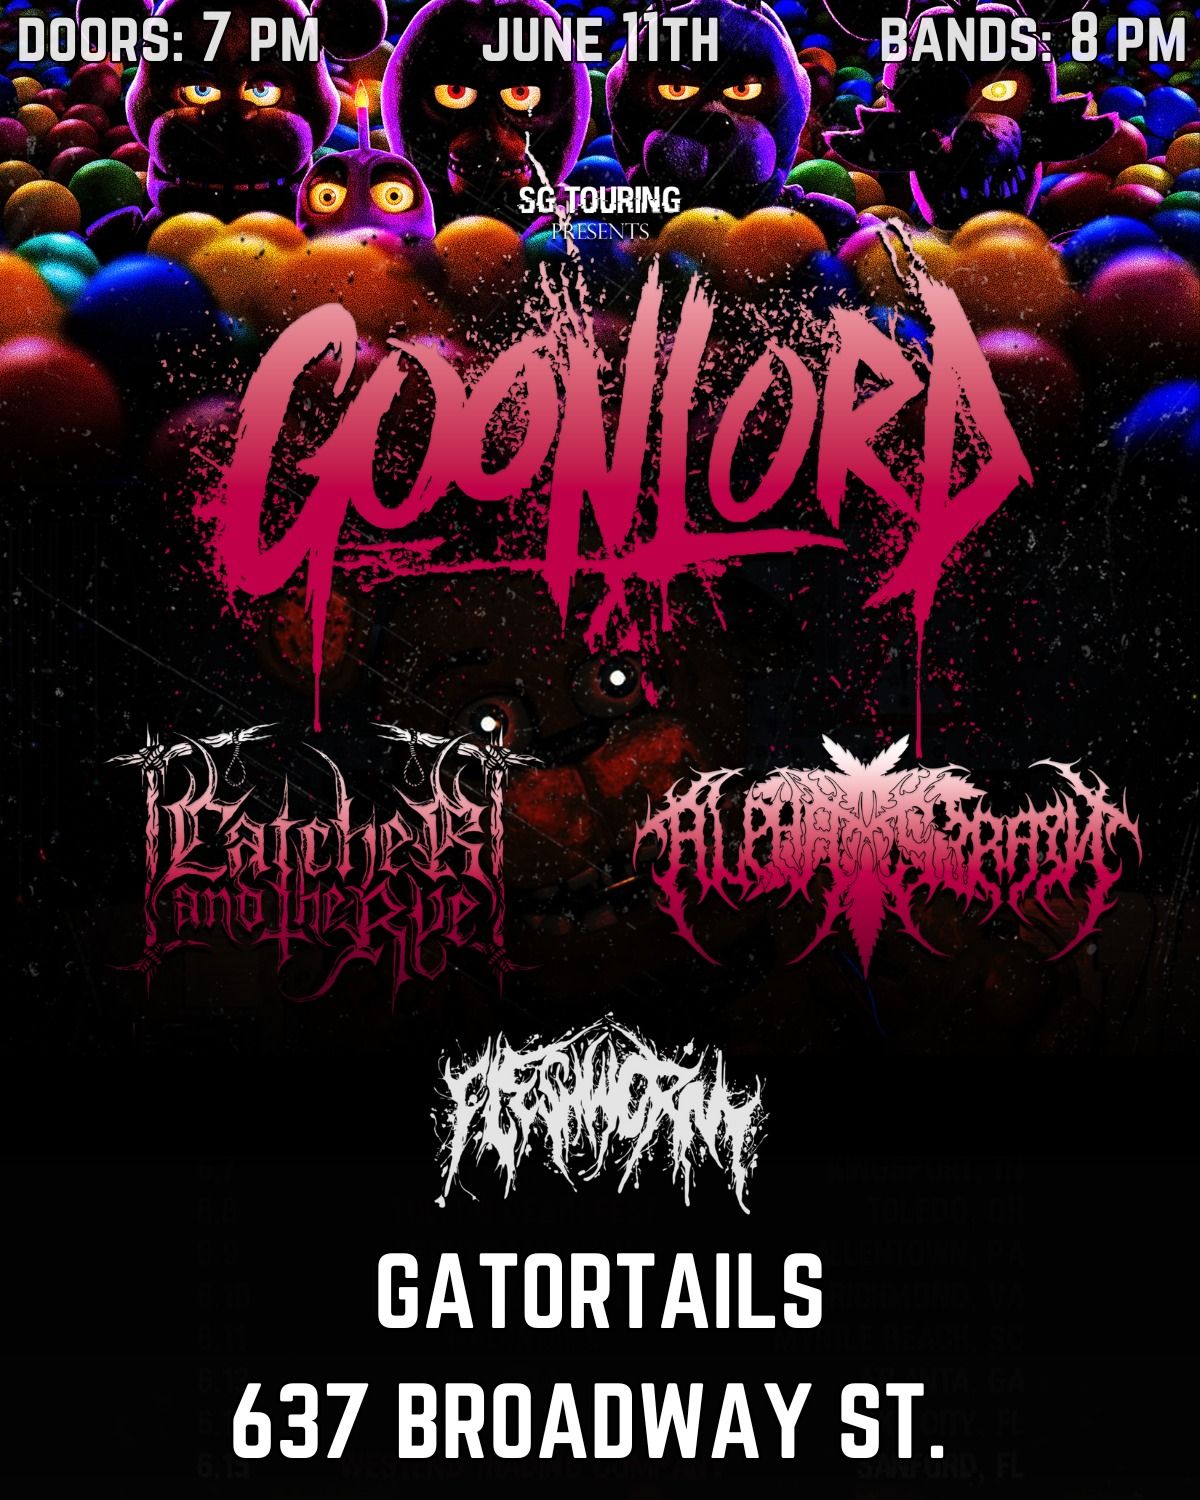 Gatortails Presents: GOONLORD, Catcher And The Rye, Alpha Strain